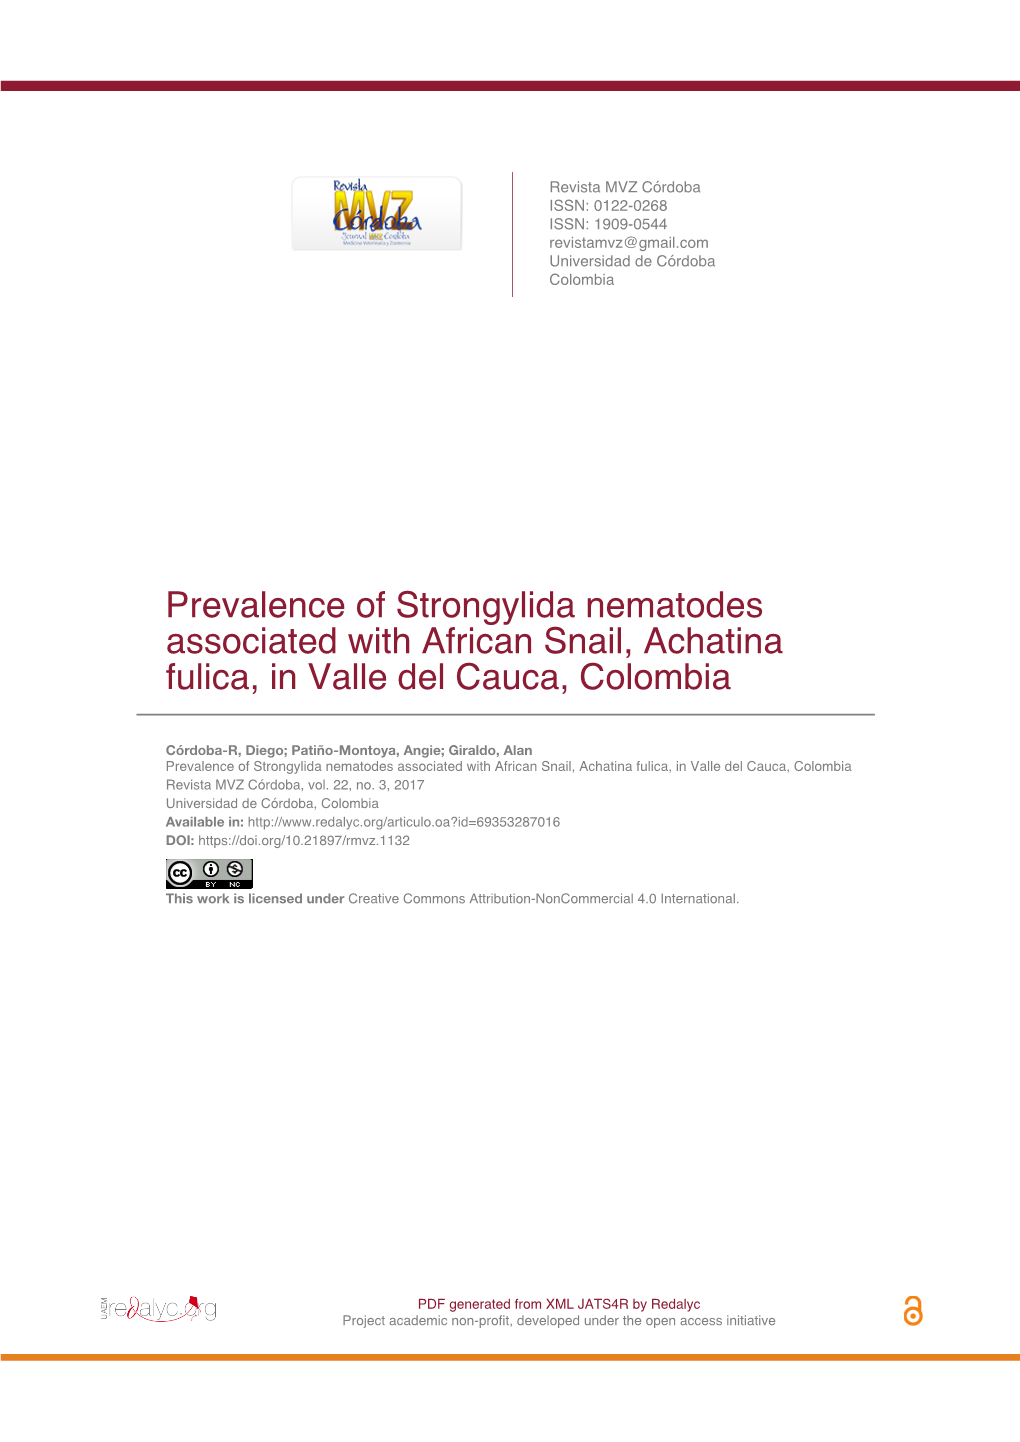 Prevalence of Strongylida Nematodes Associated with African Snail, Achatina Fulica, in Valle Del Cauca, Colombia